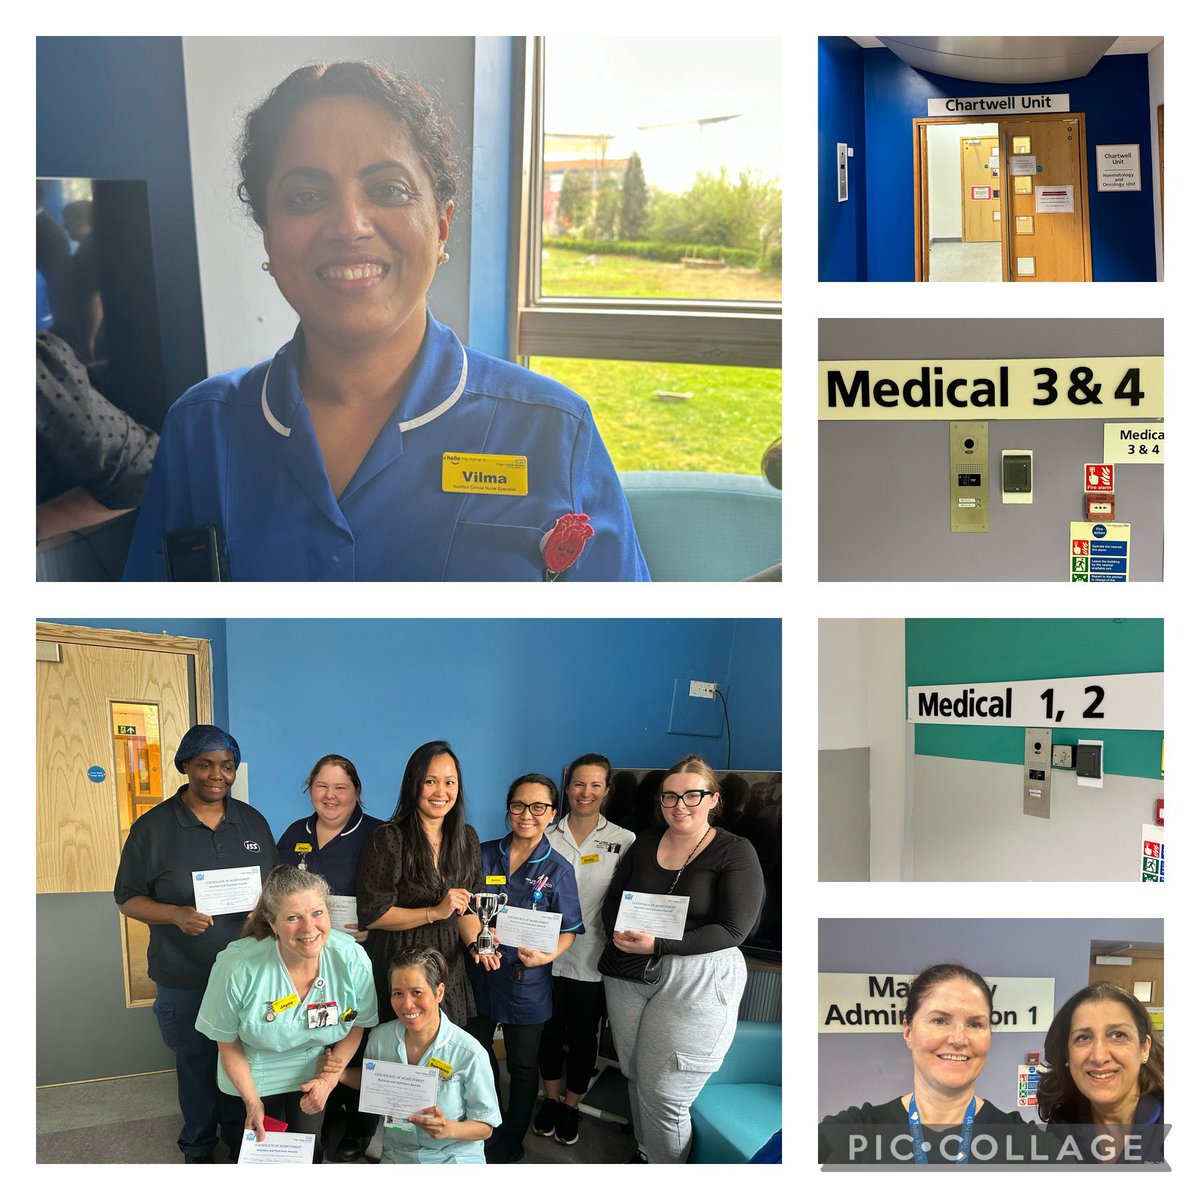 Lovely walk around at the PRUH site @KingsCollegeNHS very privileged to present certain for nutrition & hydration week with the fabulous Vilma. Great feedback from pts in chartwell and I met the pet therapy dog. @MitraB95 settling in well as new DoM @KingsMaternity #TeamKings